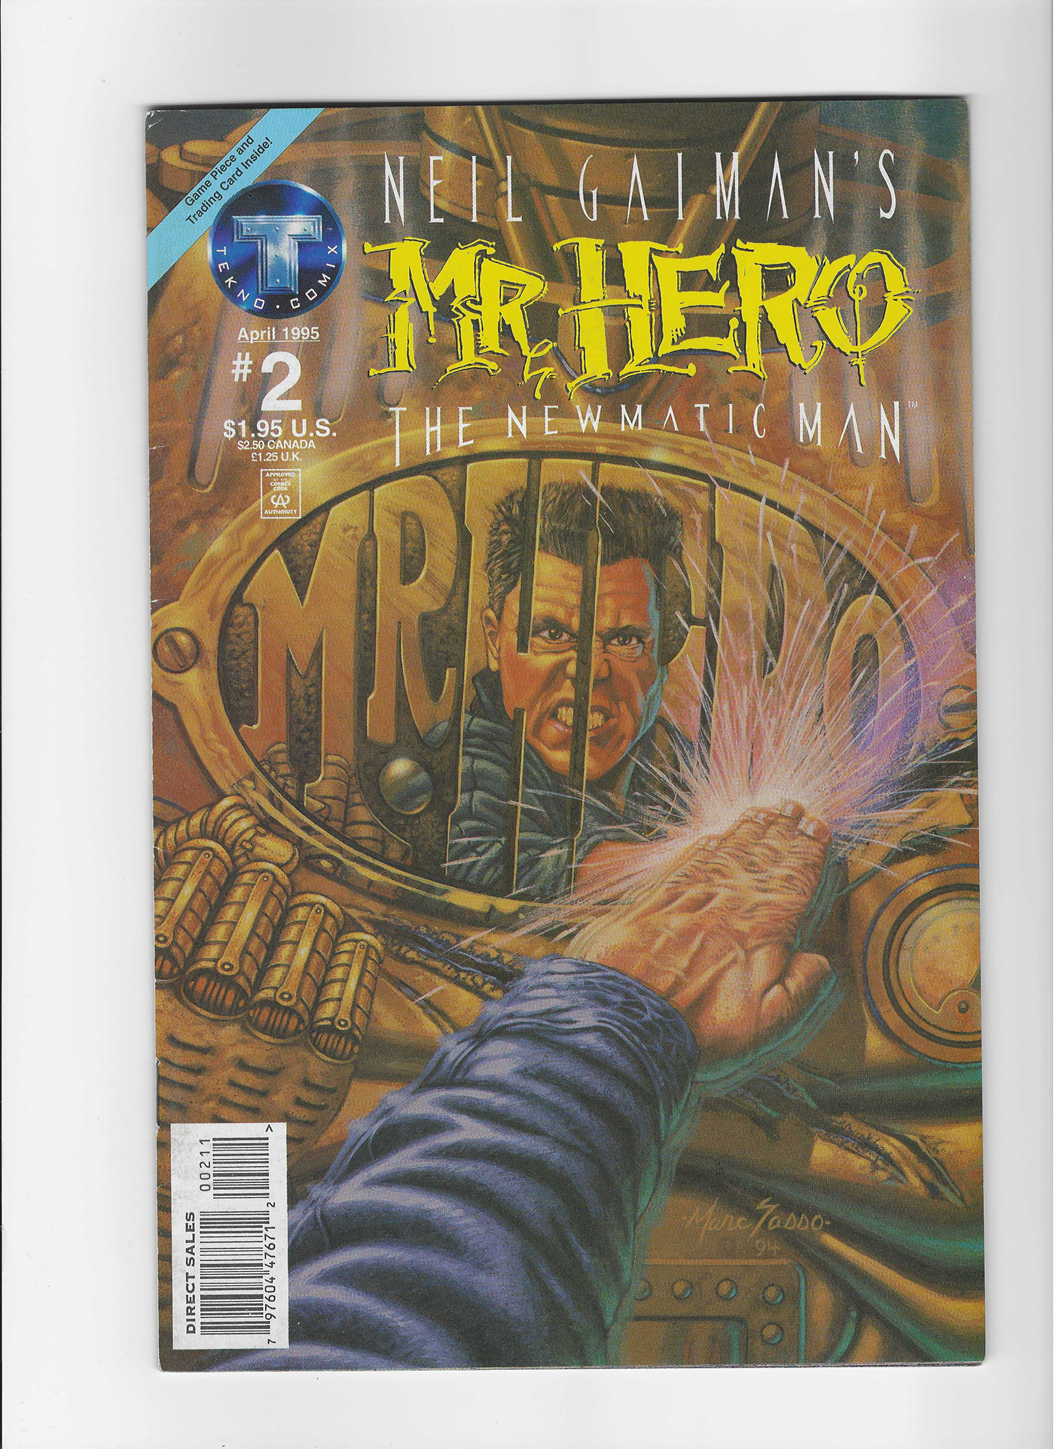 Neil Gaiman's Mr. Hero: The Newmatic Man, Vol. 1 #2A - With cards